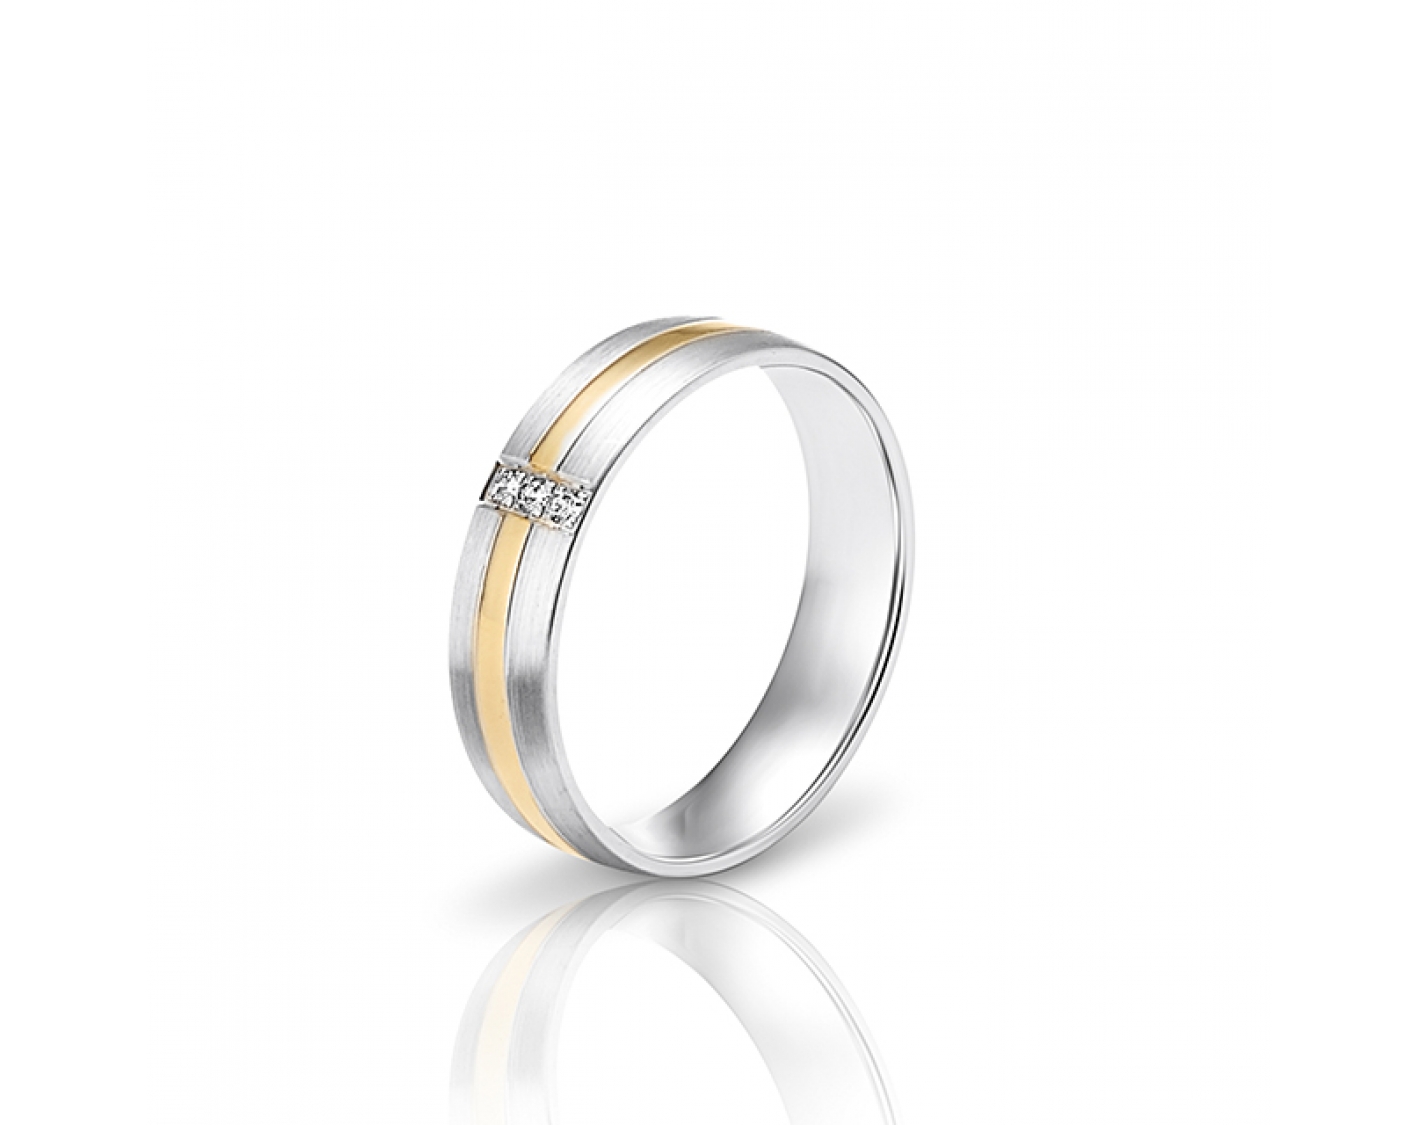 dual-tone 5,2mm two-toned* wedding band with diamonds Photos & images